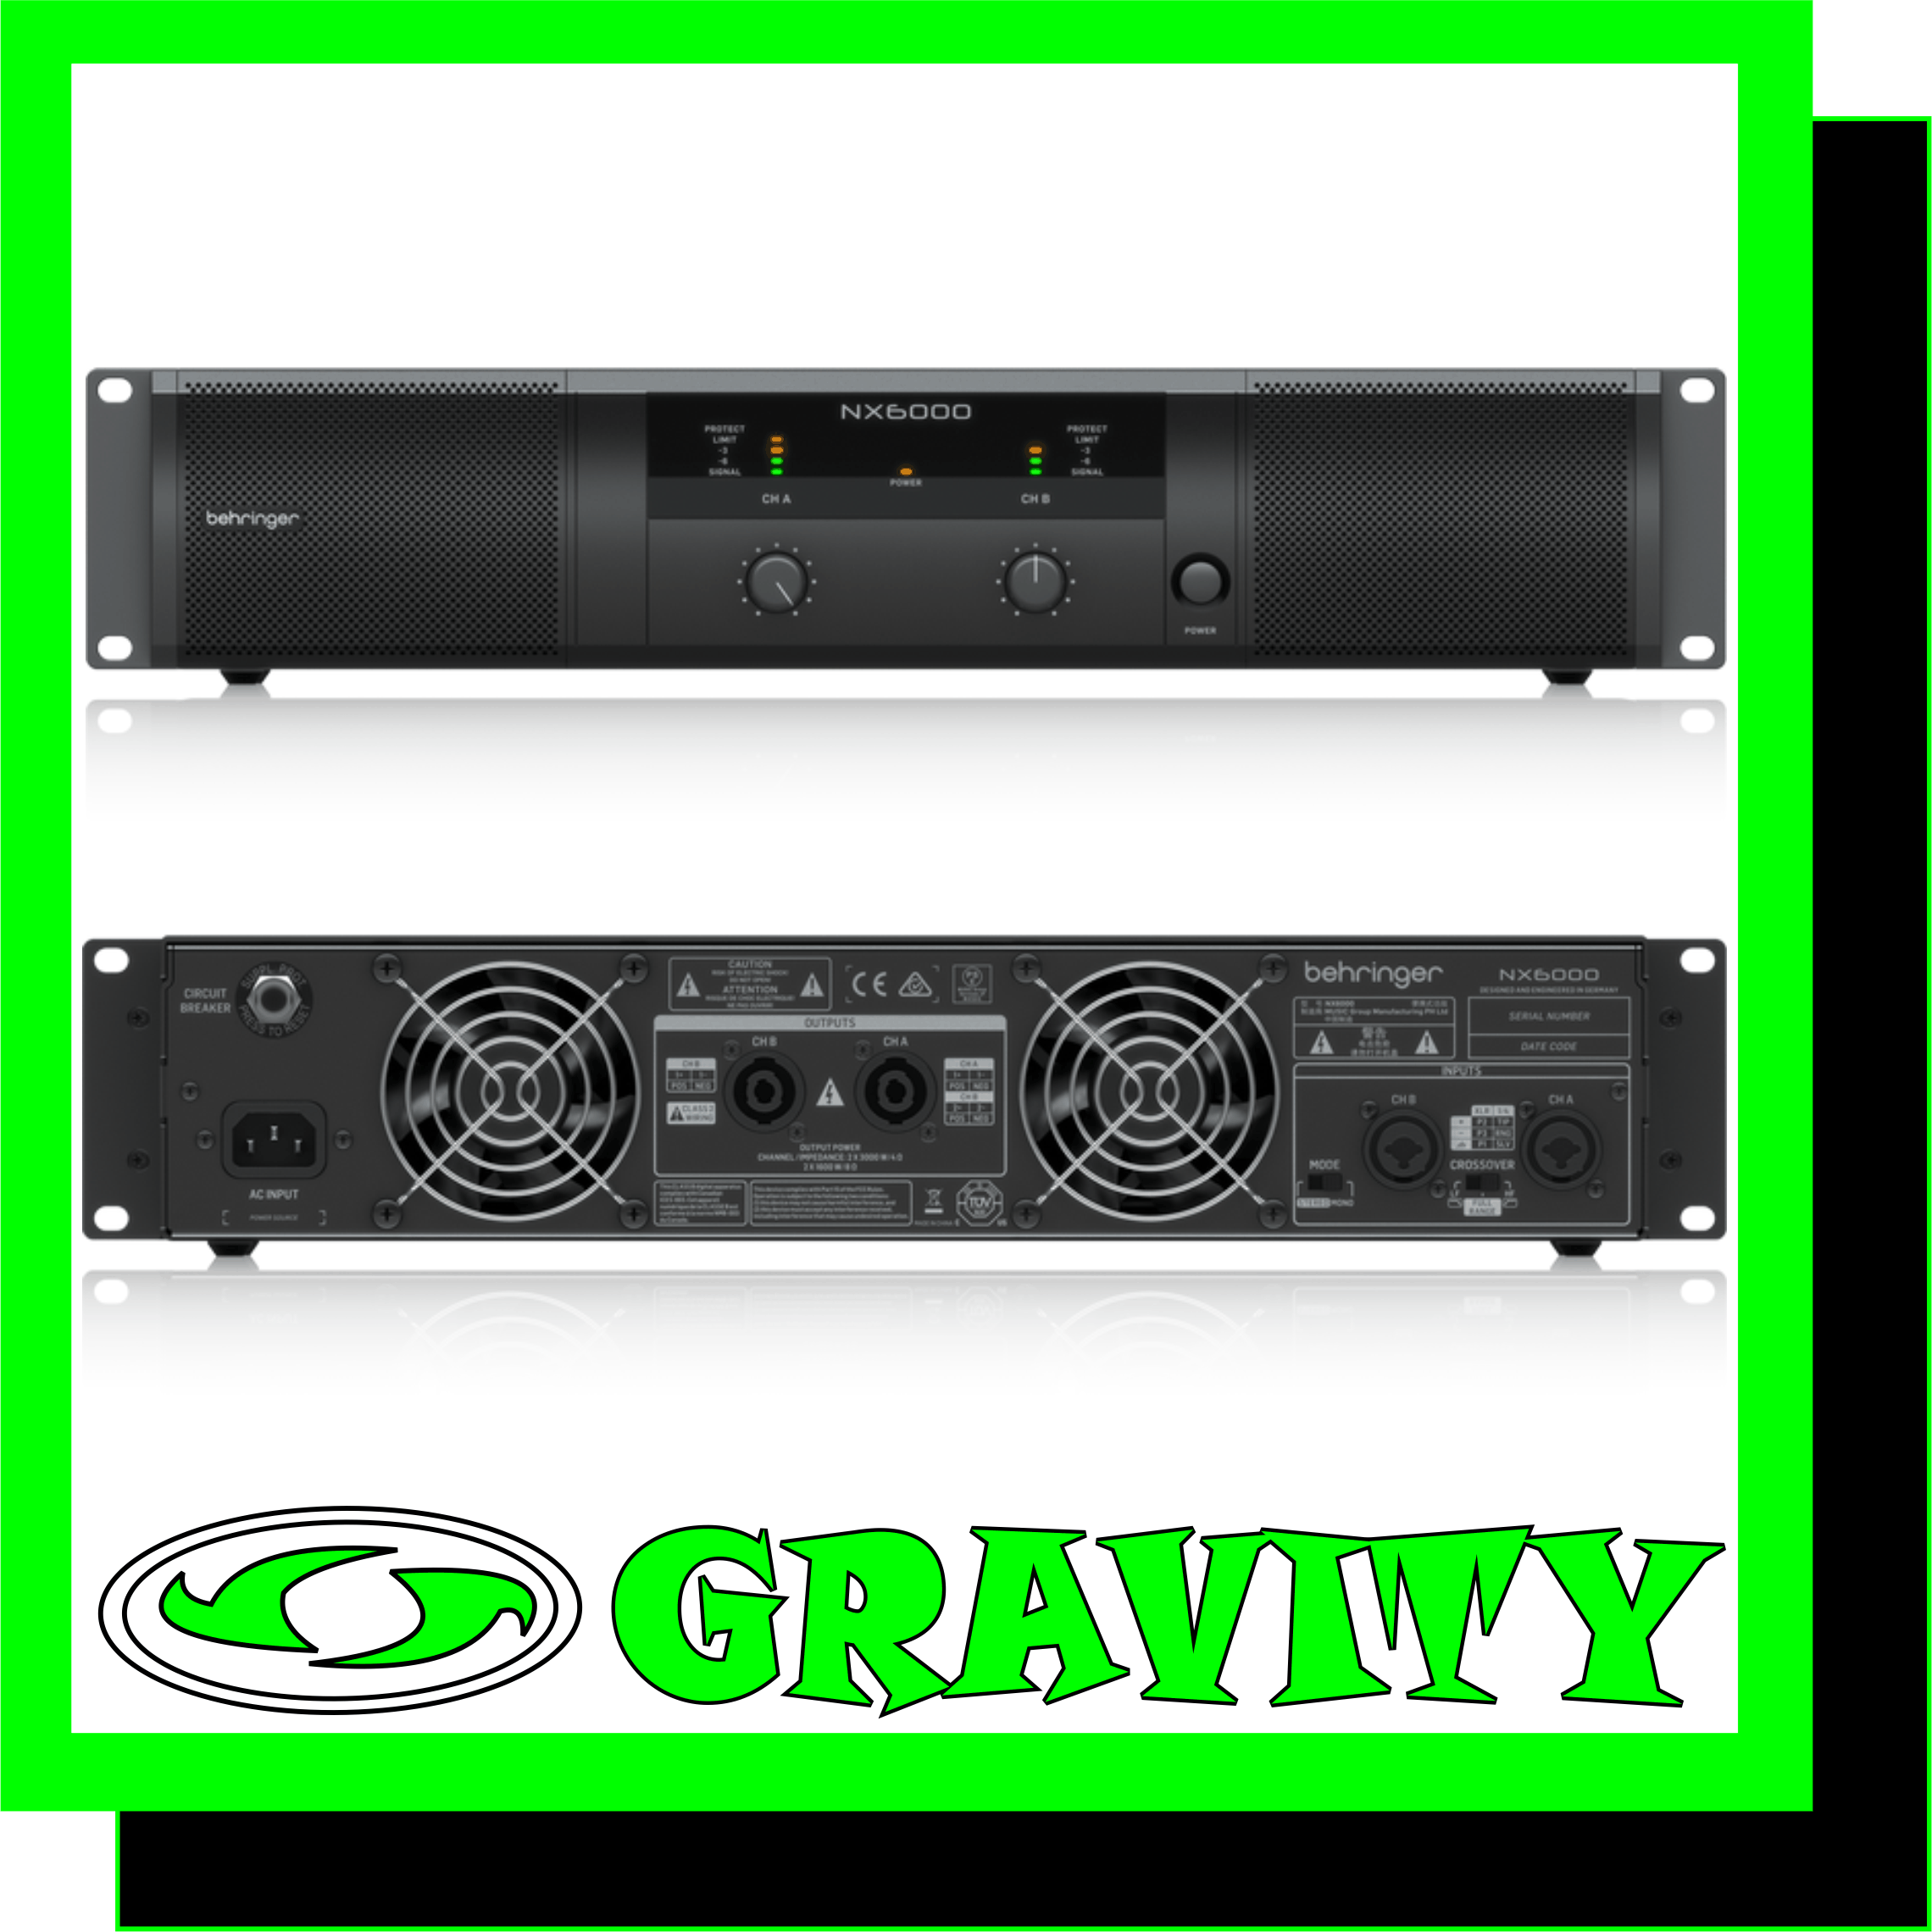 NX6000 Ultra-Lightweight 6000-Watt Class-D Power Amplifier with SmartSense Loudspeaker Impedance Compensation  -Delivers 2 x 3000 Watts into 4 Ohms; 2 x 1600 Watts into 8 Ohms and weighs less than 13 lbs / 5.9 kg -Ultimate reliability through revolutionary cool-running High-Density Class-D technology with “near-zero” thermal buildup -Ultra-efficient switch-mode power supply for noise-free audio, superior transient response and low power consumption -Built-in stereo crossover with low-cut, high-cut and full range mode -SmartSense Loudspeaker impedance compensation features fully linear frequency response at any speaker load impedance -“Zero-Attack” limiters offer maximum output level with reliable overload protection -Detented and illuminated gain controls for precise level setting -Precise 4-segment Signal and Limit LEDs to monitor performance -XLR and 1/4” TRS combination input connectors for compatibility with any source -Professional twist-lock speaker connectors for ultimate reliability -Independent DC, LF and thermal overload protection on each channel automatically protects amplifier and speakers without shutting down the show -“Back-to-front” ventilation system prevents thermal buildup for reliable operation  NX6000 The NX6000 power amplifier packs 6000 Watts (2 x 3000 Watts @ 4 Ohms; 2 x 1600 Watts @ 8 Ohms) into exceptionally lightweight (13 lbs / 5.9 kg) and rack-mountable packages. And because the NX6000 is so much more efficient than conventional designs, it runs cooler and doesn’t require the massive heat sinks and heavy toroid transformers typically associated with its conventional counterparts. Thanks to our “Zero-Attack” limiters that offer maximum output level with exceptionally-reliable overload protection and SmartSense Loudspeaker impedance compensation, which provides fully linear frequency response at any speaker load impedance, you can run the NX6000 full-out for hours on-end. Our revolutionary high-density Class-D technology, combined with an ultra-efficient, switch-mode power supply ensure this feather-light powerhouse will drive your rig effortlessly for many years to come.  Class-D – Massive Power, Perfect Sound Thanks to our High-Density Class-D amplifier Technology, we are able to provide you with enormous power and incredible sonic performance in an easy-to-use, ultra-portable and lightweight package. Class-D amplification makes all the difference, offering the ultimate in energy efficiency – and eliminating the need for heavy power supplies and massive heat sinks. This amazing technology makes it possible to design and build extremely-powerful products that are significantly lighter in weight than their traditional counterparts, while using less energy and protecting the environment.  Sublimely Simple Operation The front panel controls and indicators provide your system’s vital signs at a glance. After pressing the Power button, the Power LED lights to show the amp is ready for action. All channels feature positive-detent Gain controls with Signal LEDs that light when a signal is present, as well as Limit LEDs to indicate when the amplifier is running at full capacity. Just as elegant as the front, the rear panel is home to the combo XLR and 1/4? TRS Input connectors, making the NX6000 compatible with virtually any source, balanced or unbalanced. Professional twist-lock speaker sockets are provided to ensure every drop of output power gets to your loudspeakers.  The rear panel is also where you’ll find the switches that enable the NX6000 amp to run in your choice of dual mono or stereo modes. The NX6000’s built-in Crossover switch sets the amp to Full-Range mode, where the output is sent unfiltered to your loudspeakers, or Bi-amp mode, which sends only the low-frequency content (<100 Hz) to passive subwoofers, while the high-frequency content (>100 Hz) is channeled to your full-range loudspeakers.  SmartSense Impedance Compensation Our new SmartSense Technology puts the punch back into Class-D amplification, providing vastly improved full-range frequency response with more powerfully-dynamic bass, and smoother high-frequency reproduction. The resulting output is no longer dependent on the actual load, but is rendered perfectly ruler flat via impedance compensation. NX6000’s design also incorporates a significantly-higher damping factor that yields better amplifier control over the loudspeaker for stronger audio reproduction – especially in the LF area.  Sound Value Sporting massive output ratings, lightweight Class-D technology and an equally lightweight price tag – plus all the amenities a professional audio engineer could ask for – the BEHRINGER NX6000 power amplifier is a serious amp for your most demanding applications.  Experience the BEHRINGER NX6000 amplifier at your local dealer, or get yours online today, and find out why more and more professionals are turning to BEHRINGER amplifiers for their superb performance and extraordinary value.